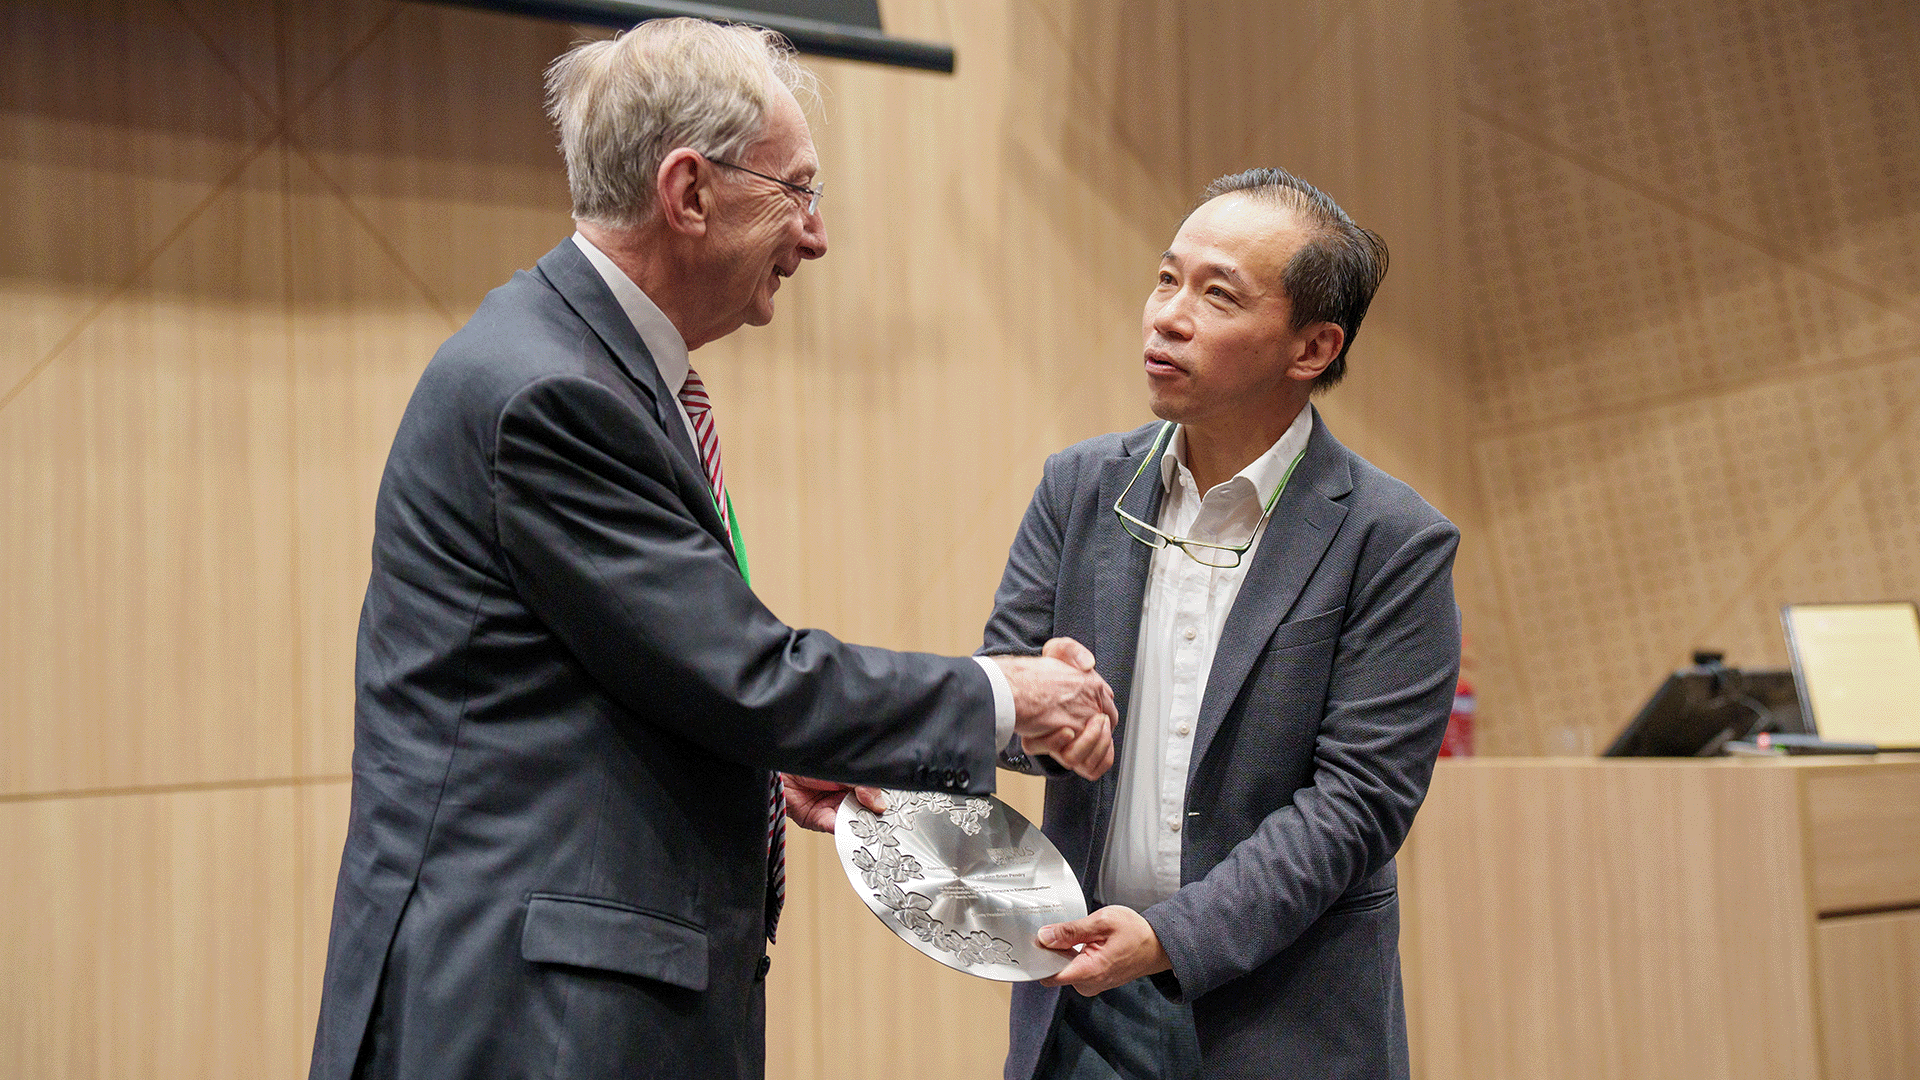 Prof Pendry receiving a token of appreciation from NUS Deputy President (Academic Affairs) and Provost, Prof Aaron Thean.